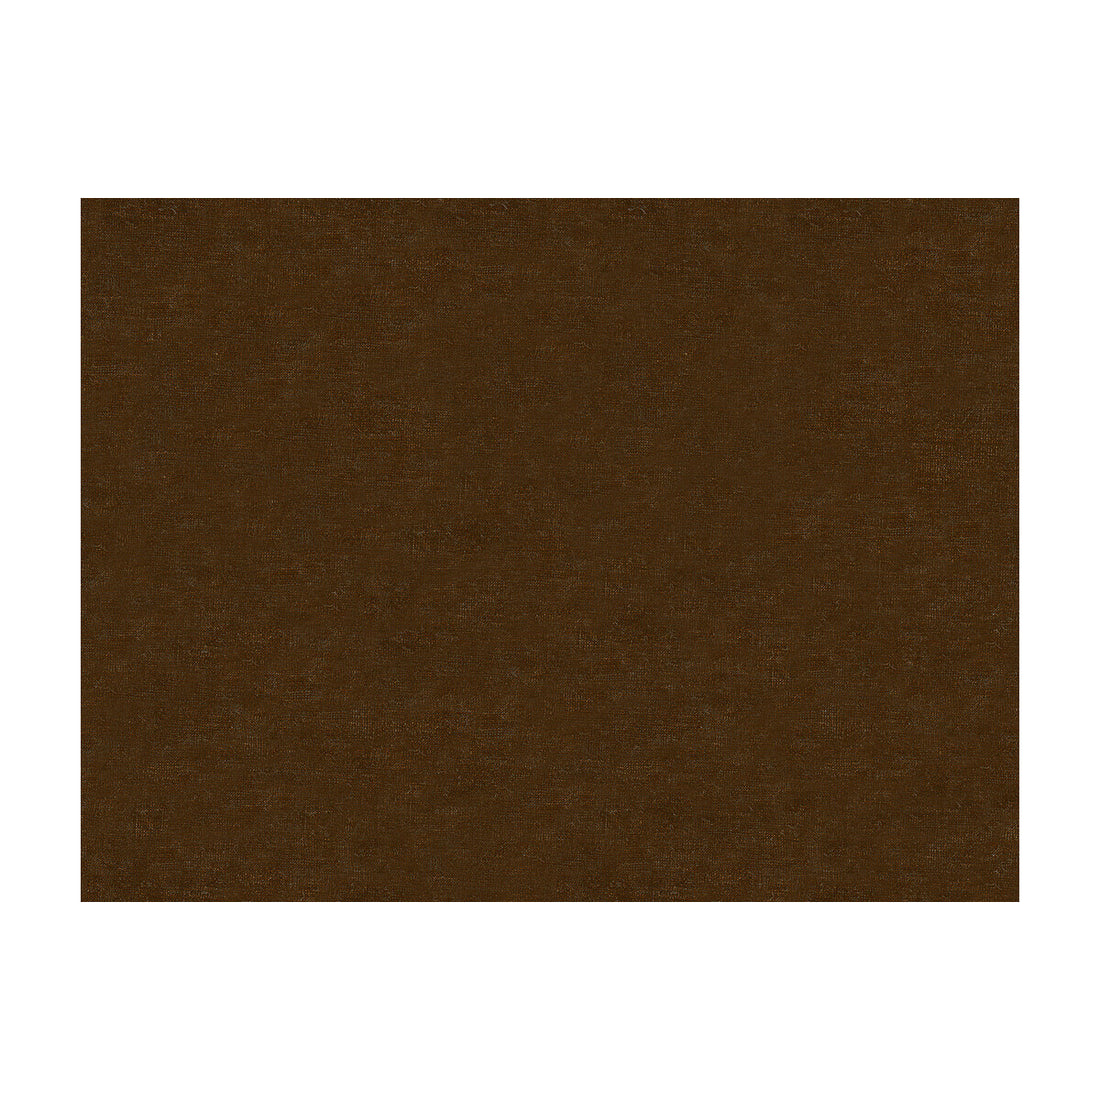 Looker fabric in cocoa color - pattern LOOKER.66.0 - by Kravet Contract